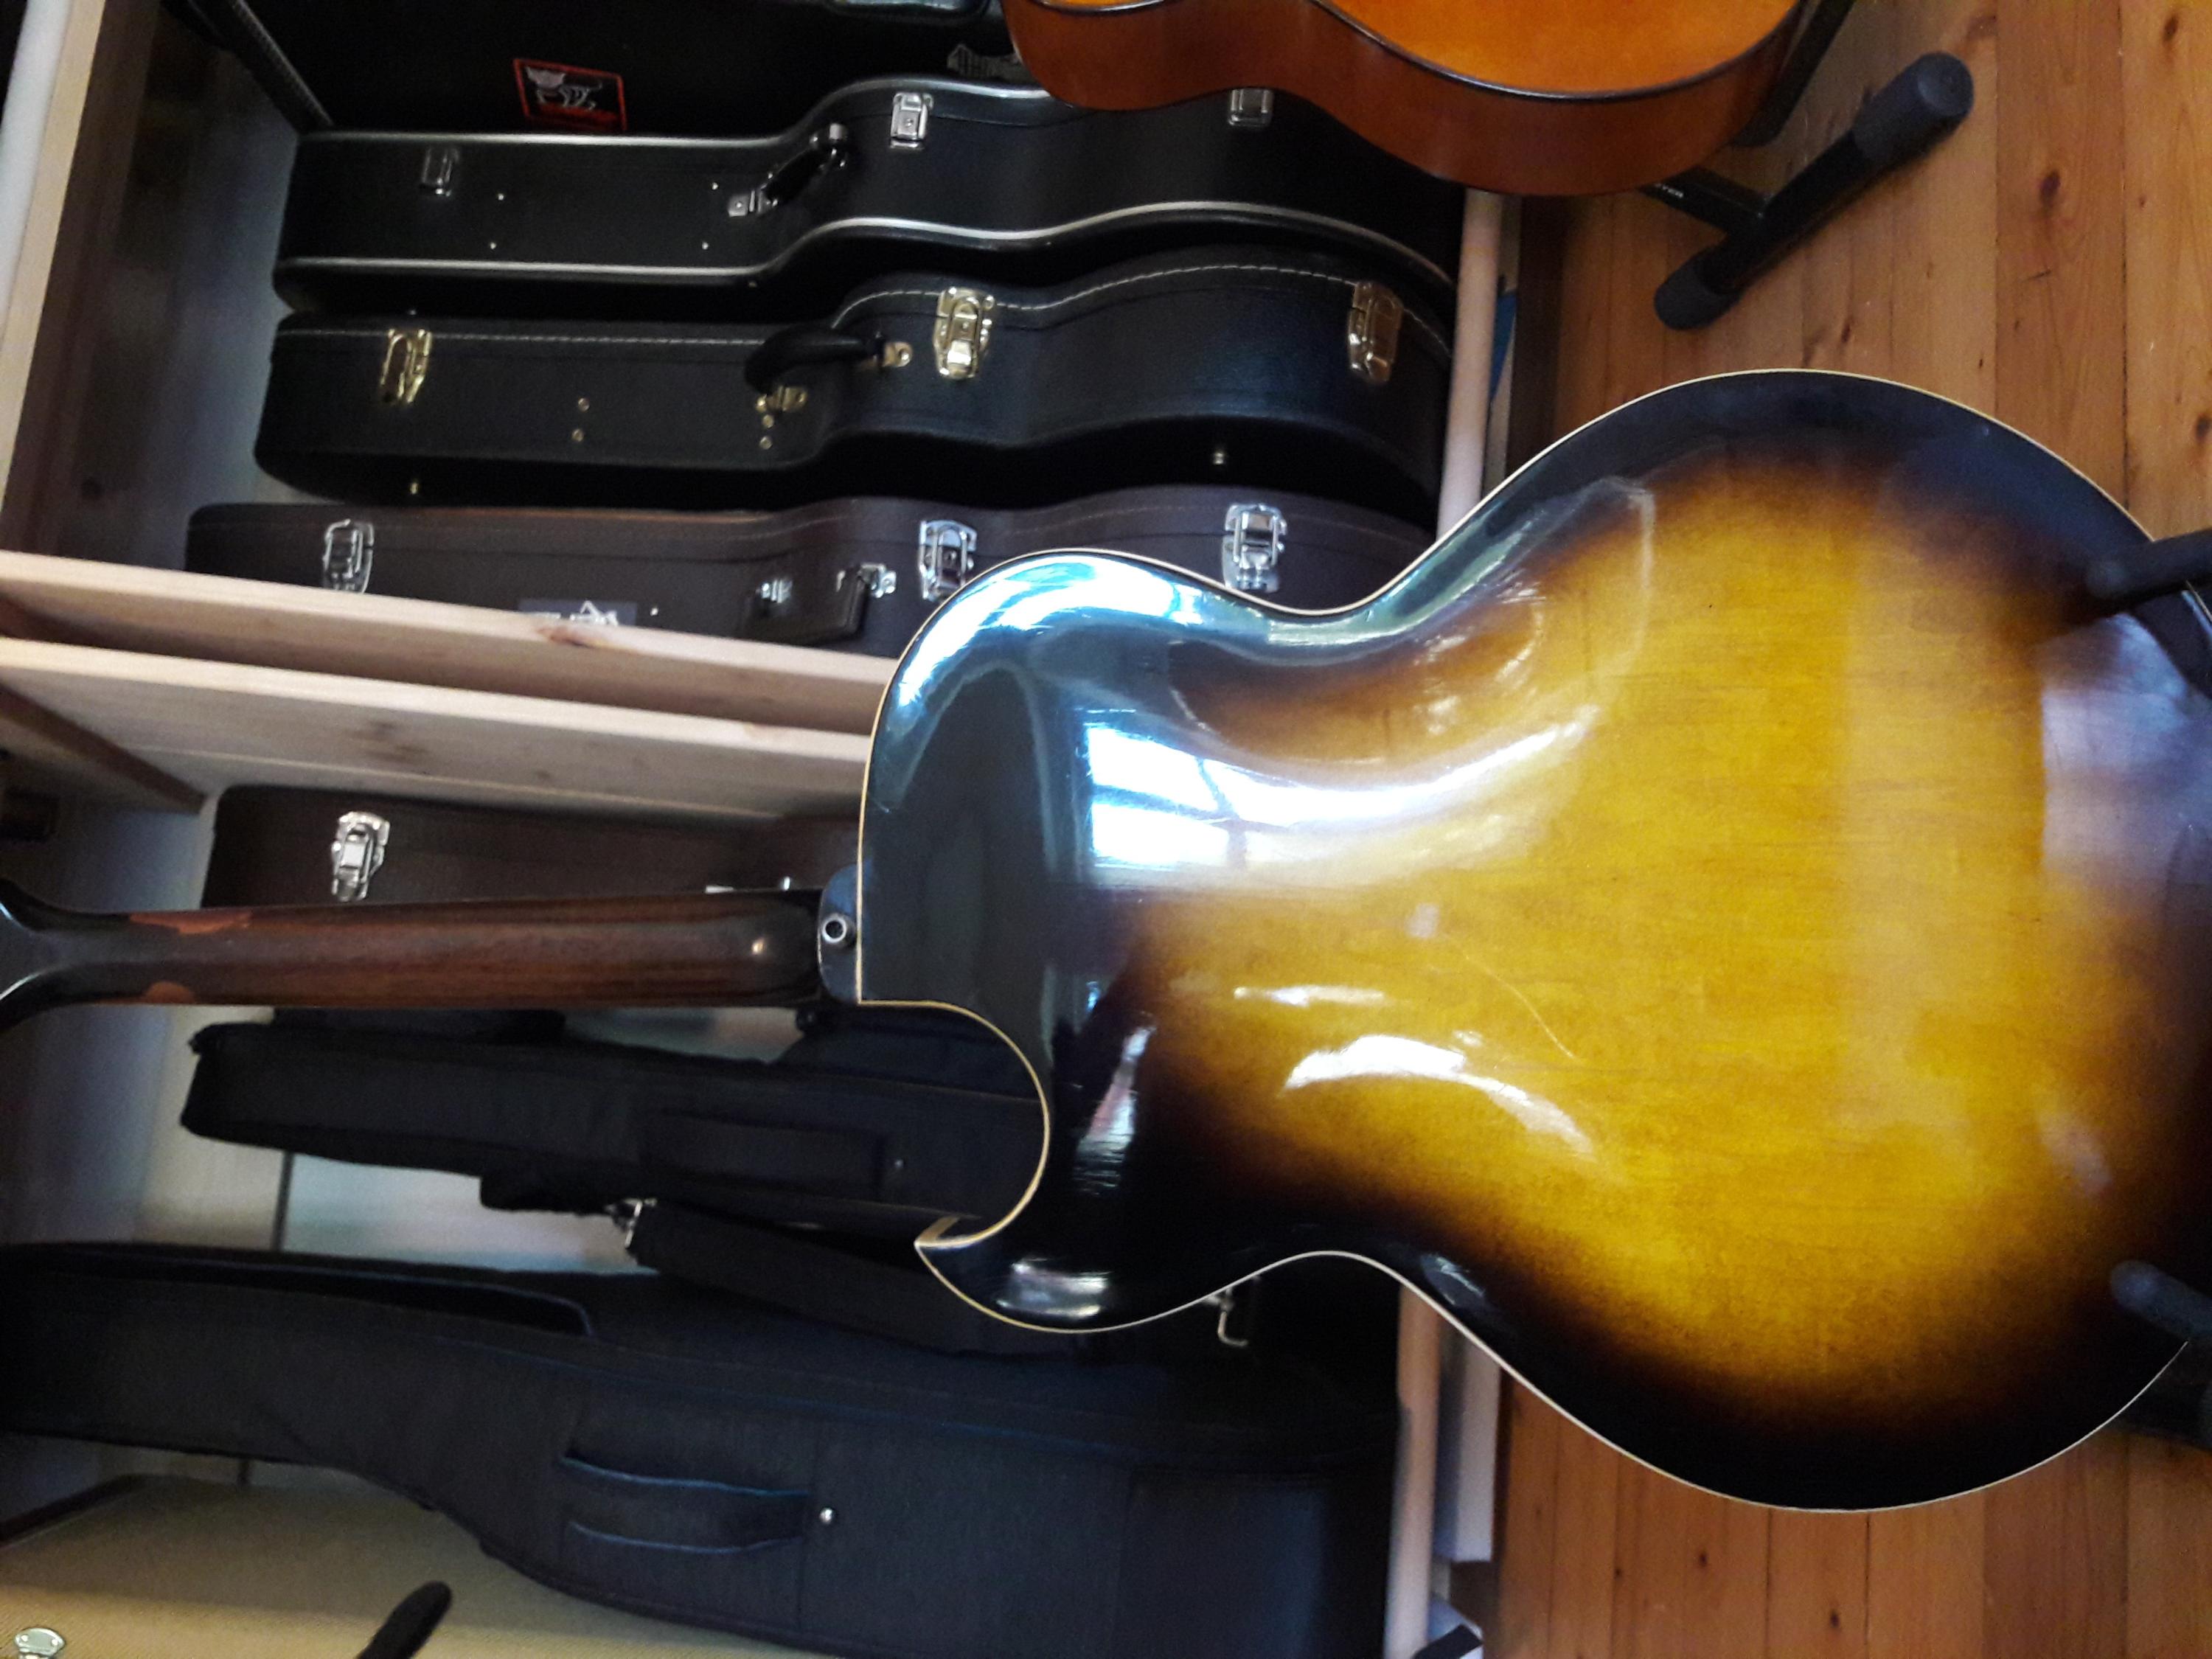 Thoughts On This Near Immaculate 1951 Gibson ES-175-20211022_084311-jpg